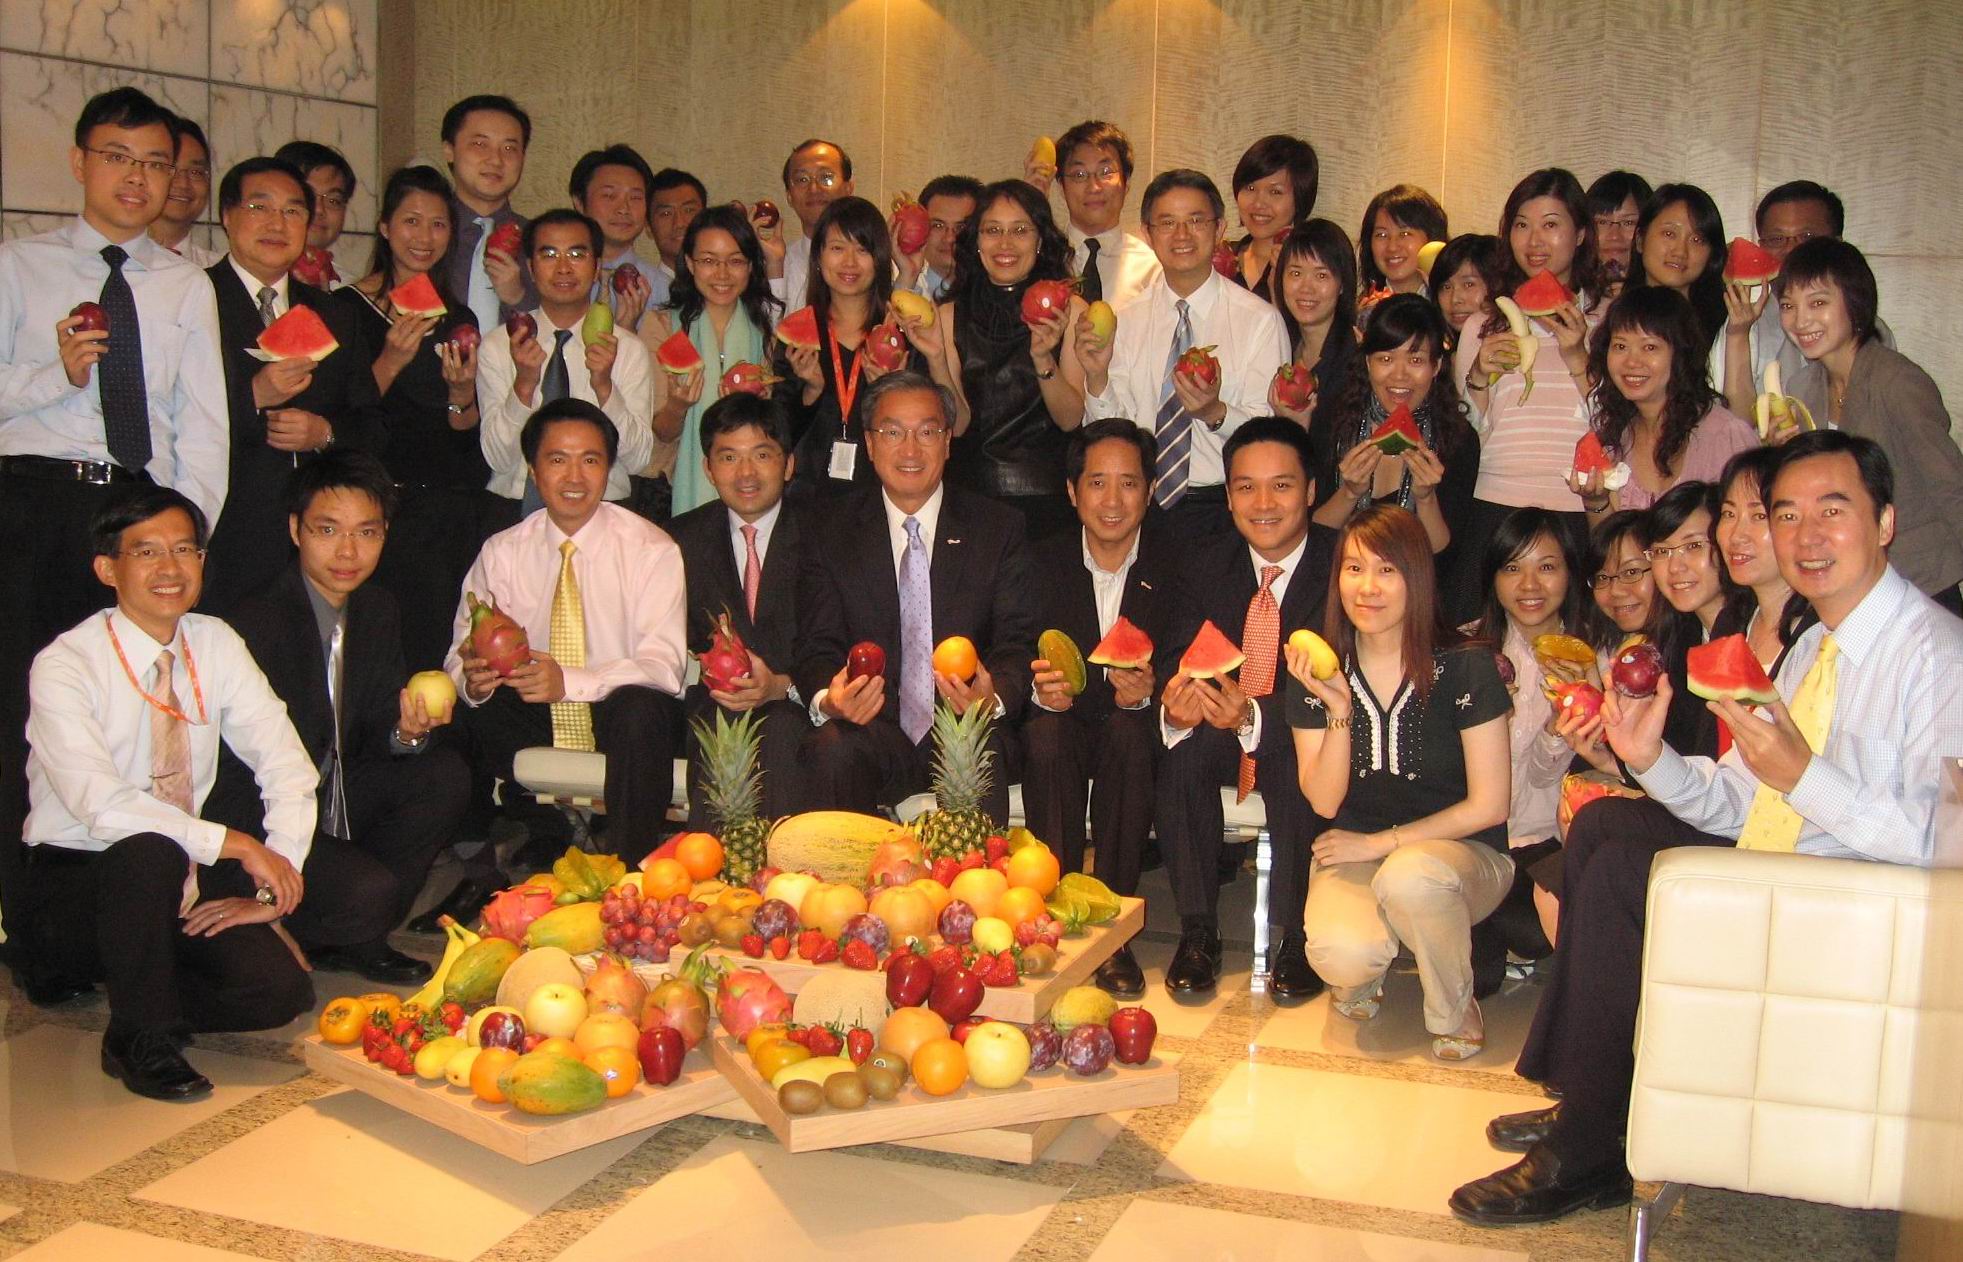 The fourth year of "Fruit for Care" campaign to promote healthy lifestyle